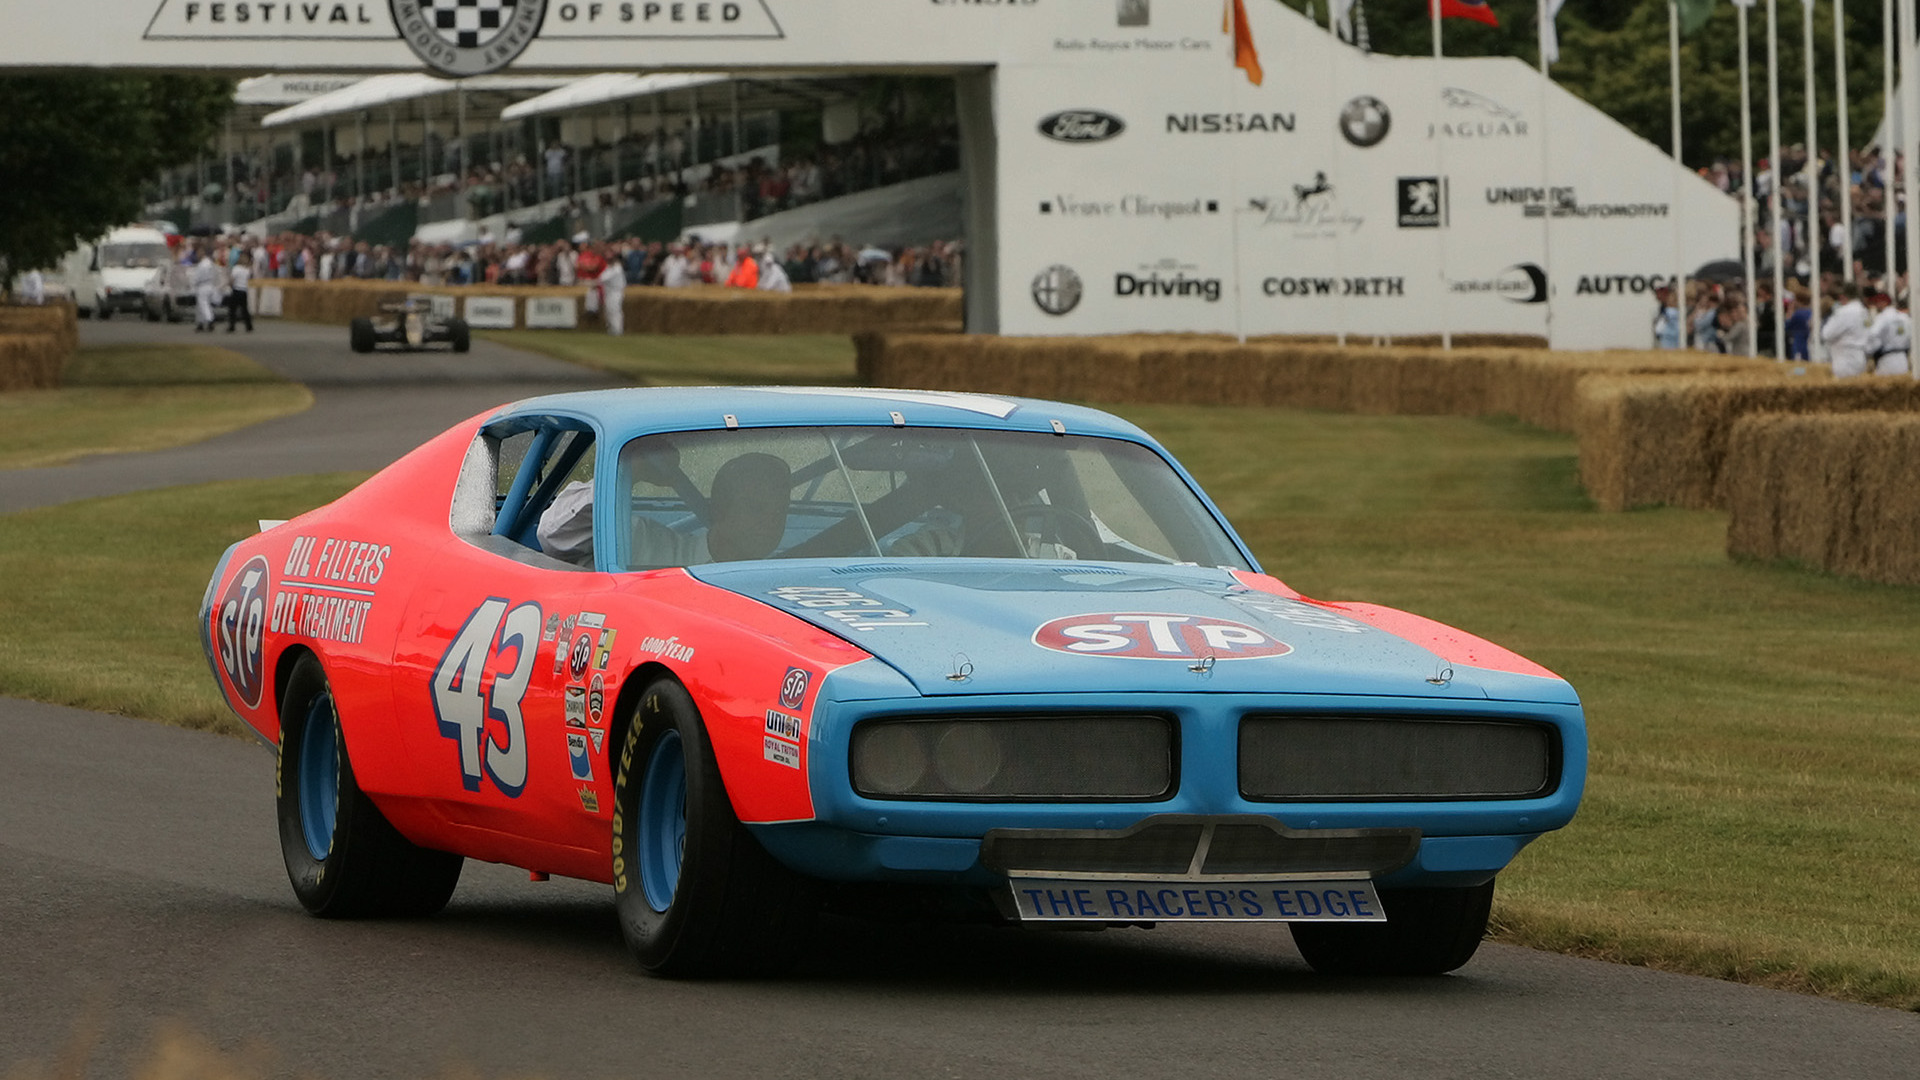  Wallpapers on Dodge Charger Nascar Race Car Front And Hd Wallpaper Of Cars   Trucks